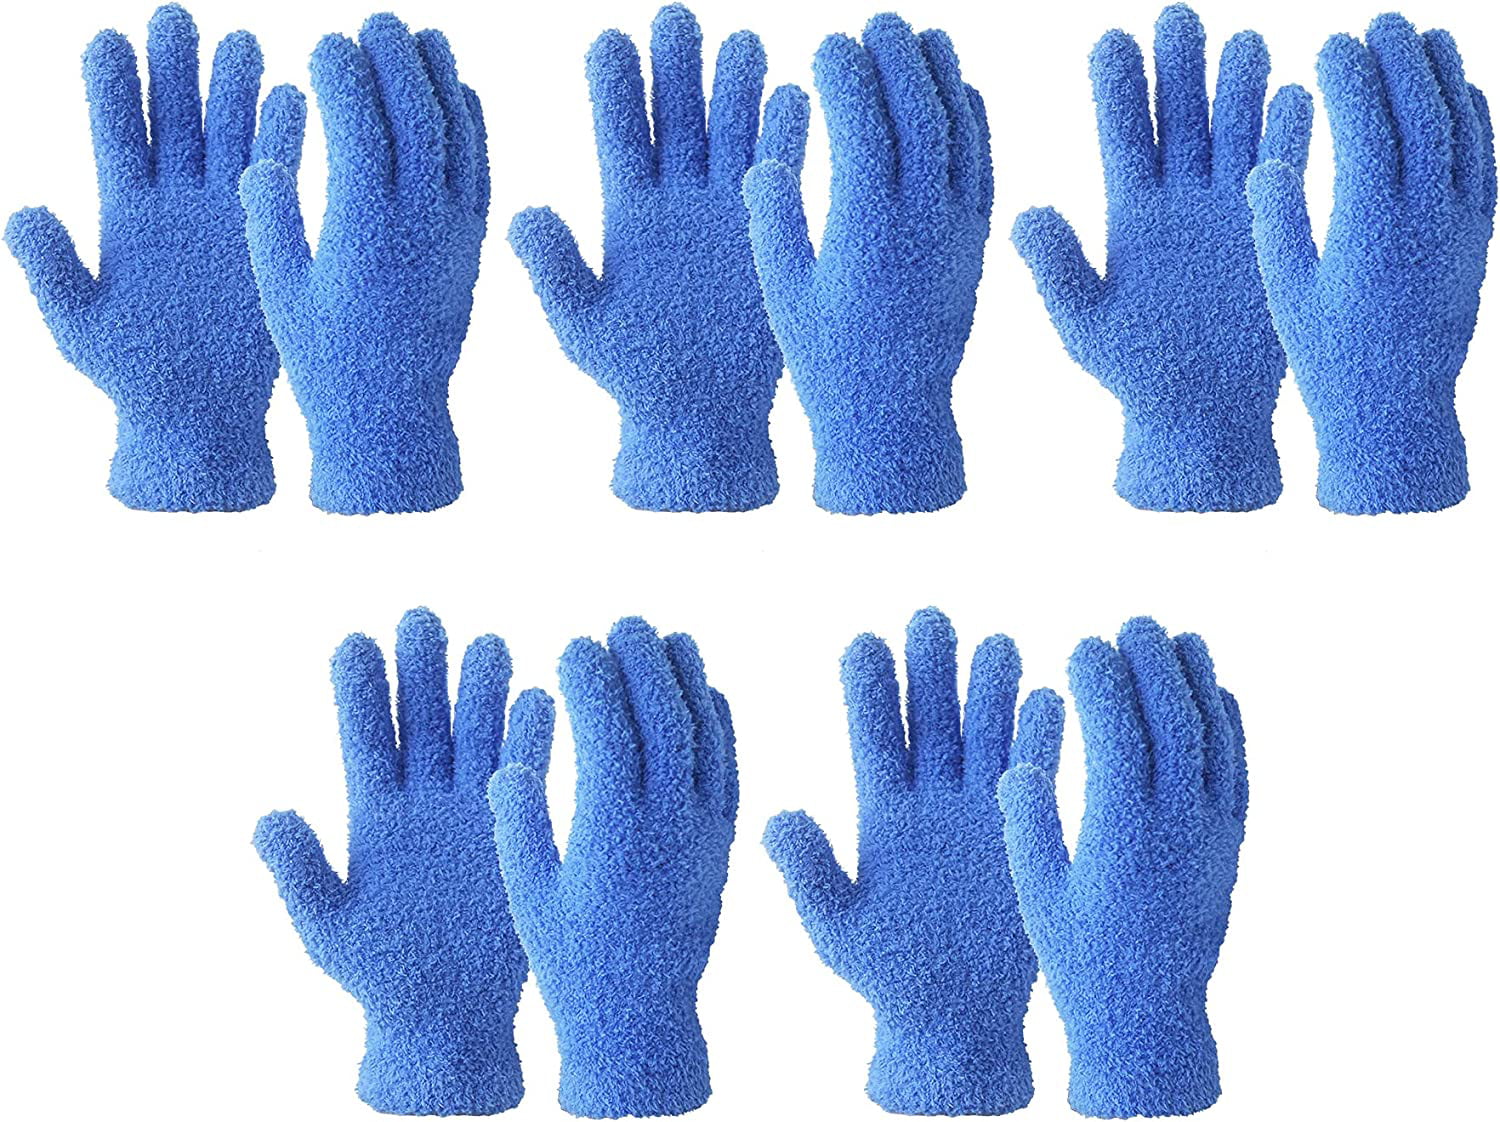 Grevosea Microfiber Gloves, Washable Cleaning Microfiber Dusting Gloves  Reusable Lint-Free Cleaning Gloves for Kitchen House Blinds Cleaning, Blue